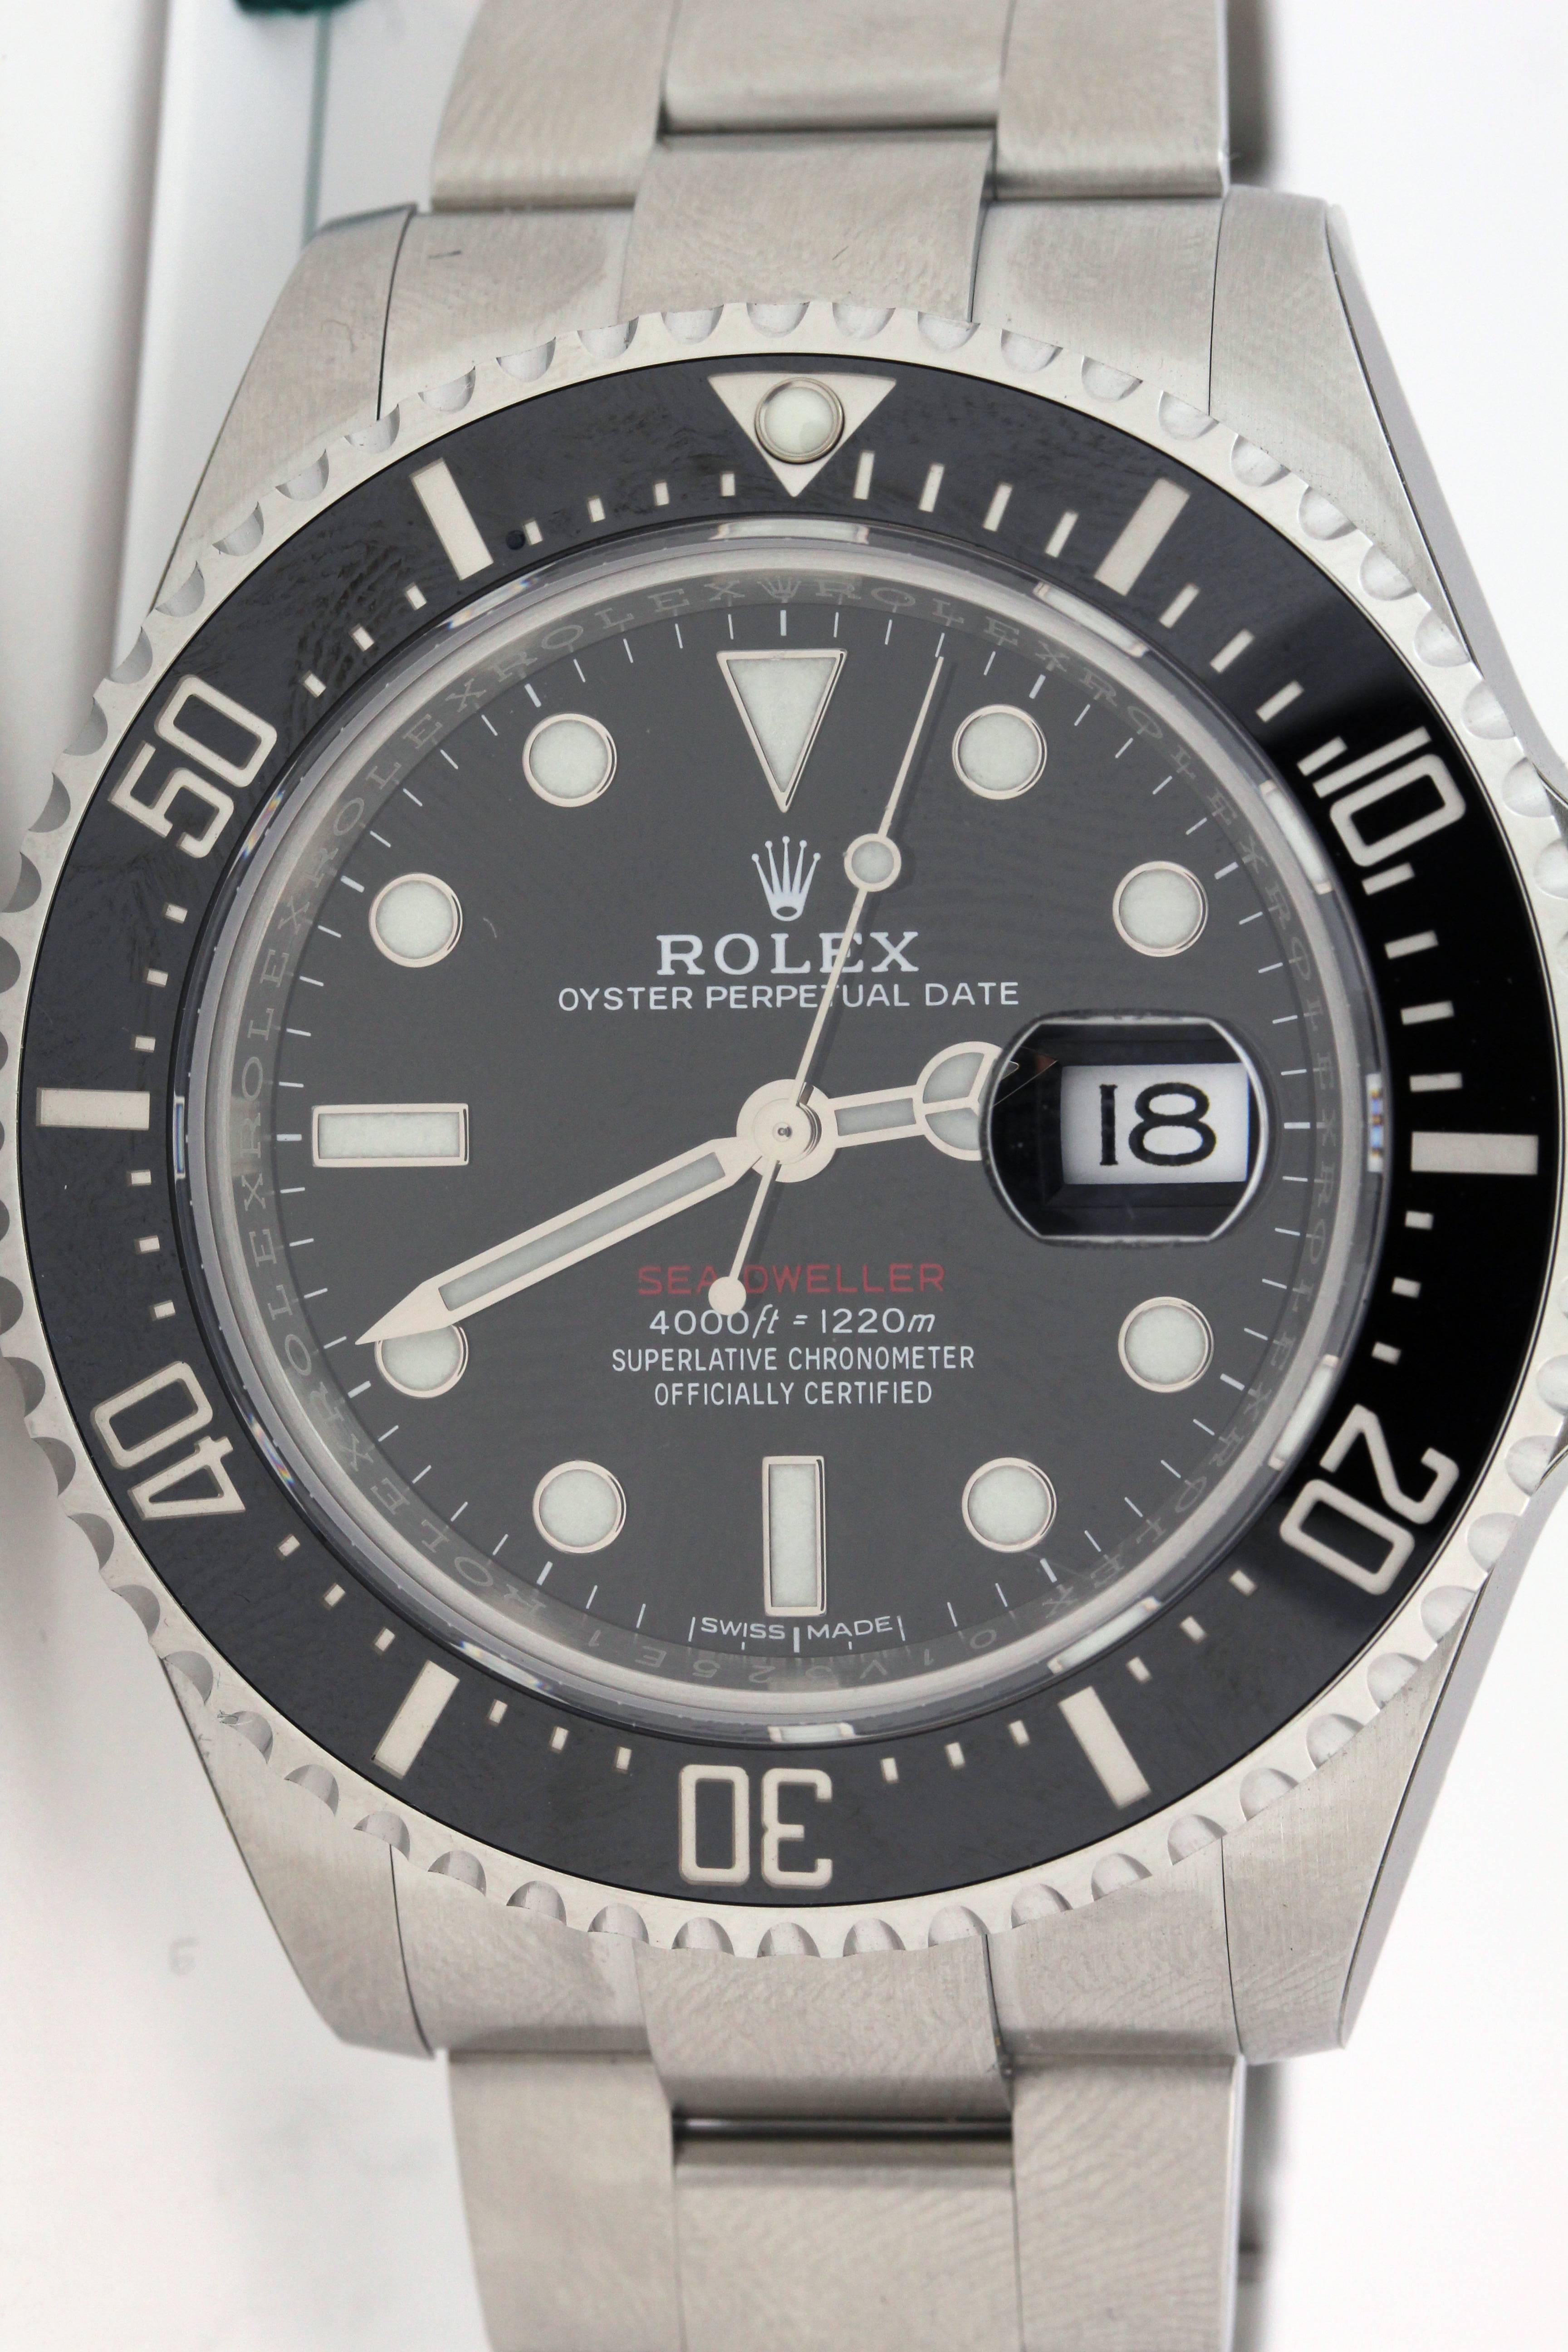 Brand New with stickers, papers and box

Rolex Sea-Dweller 2017 Stainless Steel Watch 43mm

Water proof up to 4,000 feet

This watch was introduced during Baselworld 2017

Very hard to find due to high demand



